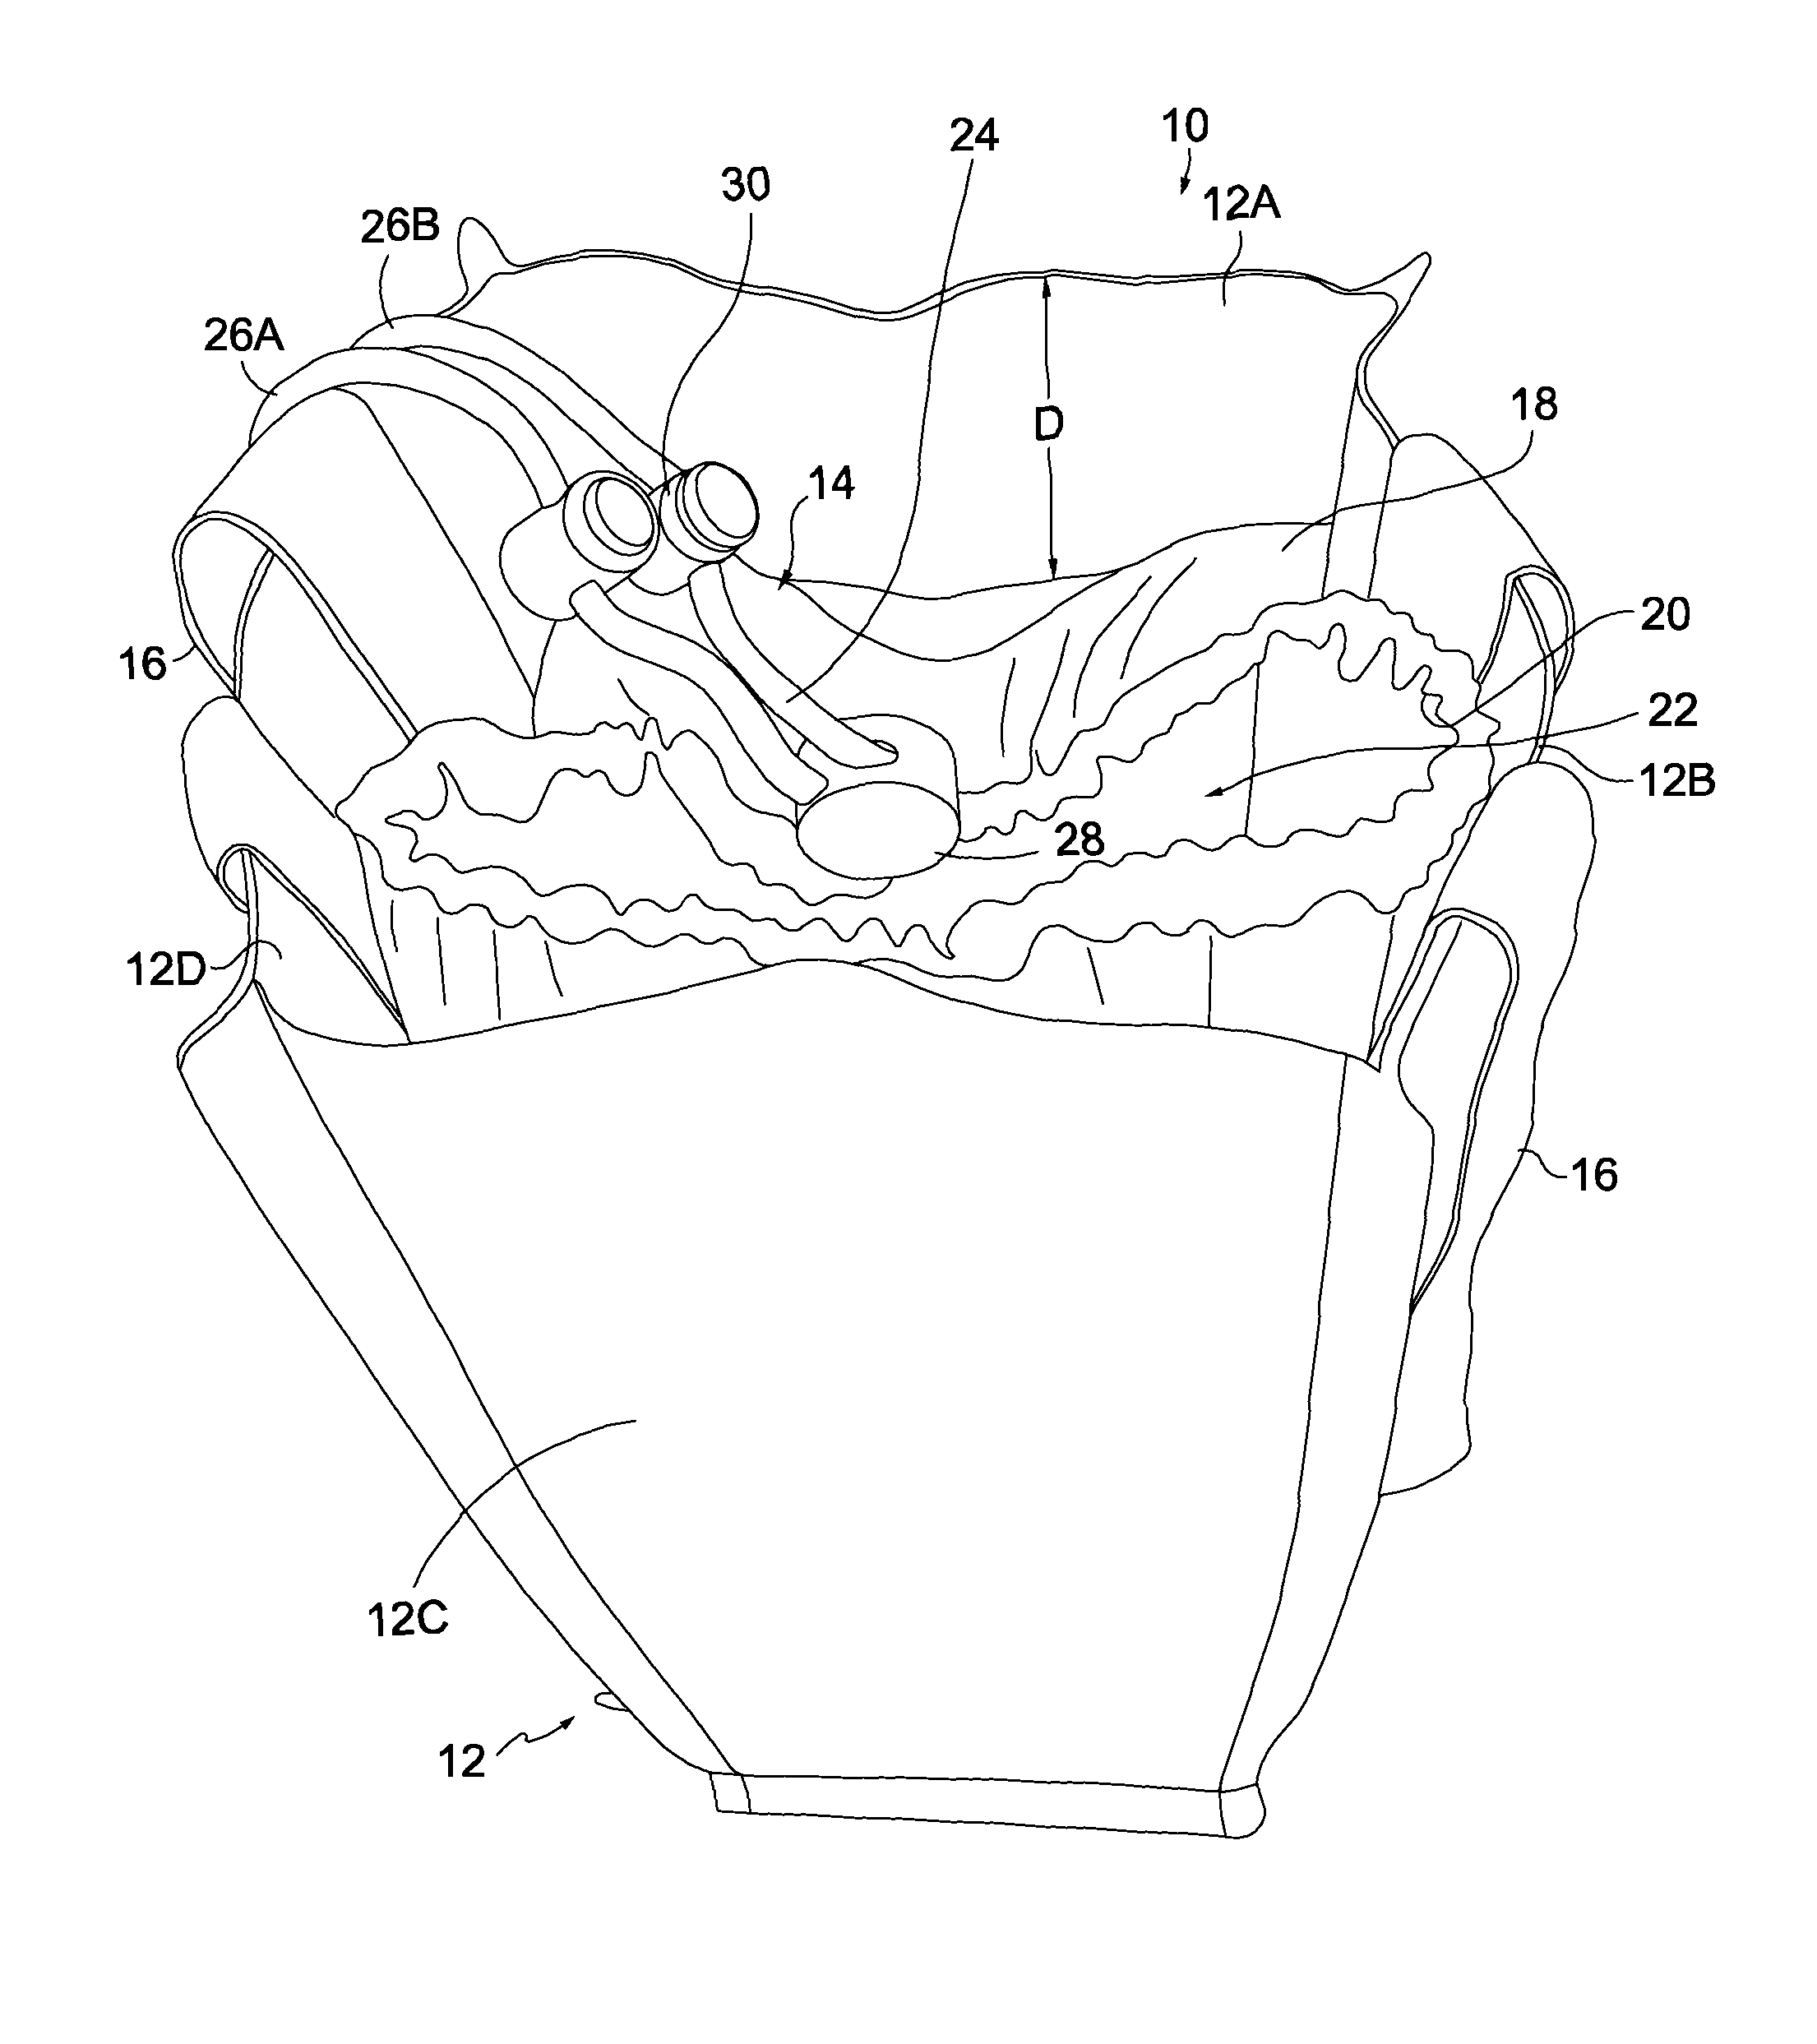 Child-resistant closure mechanism and packaging